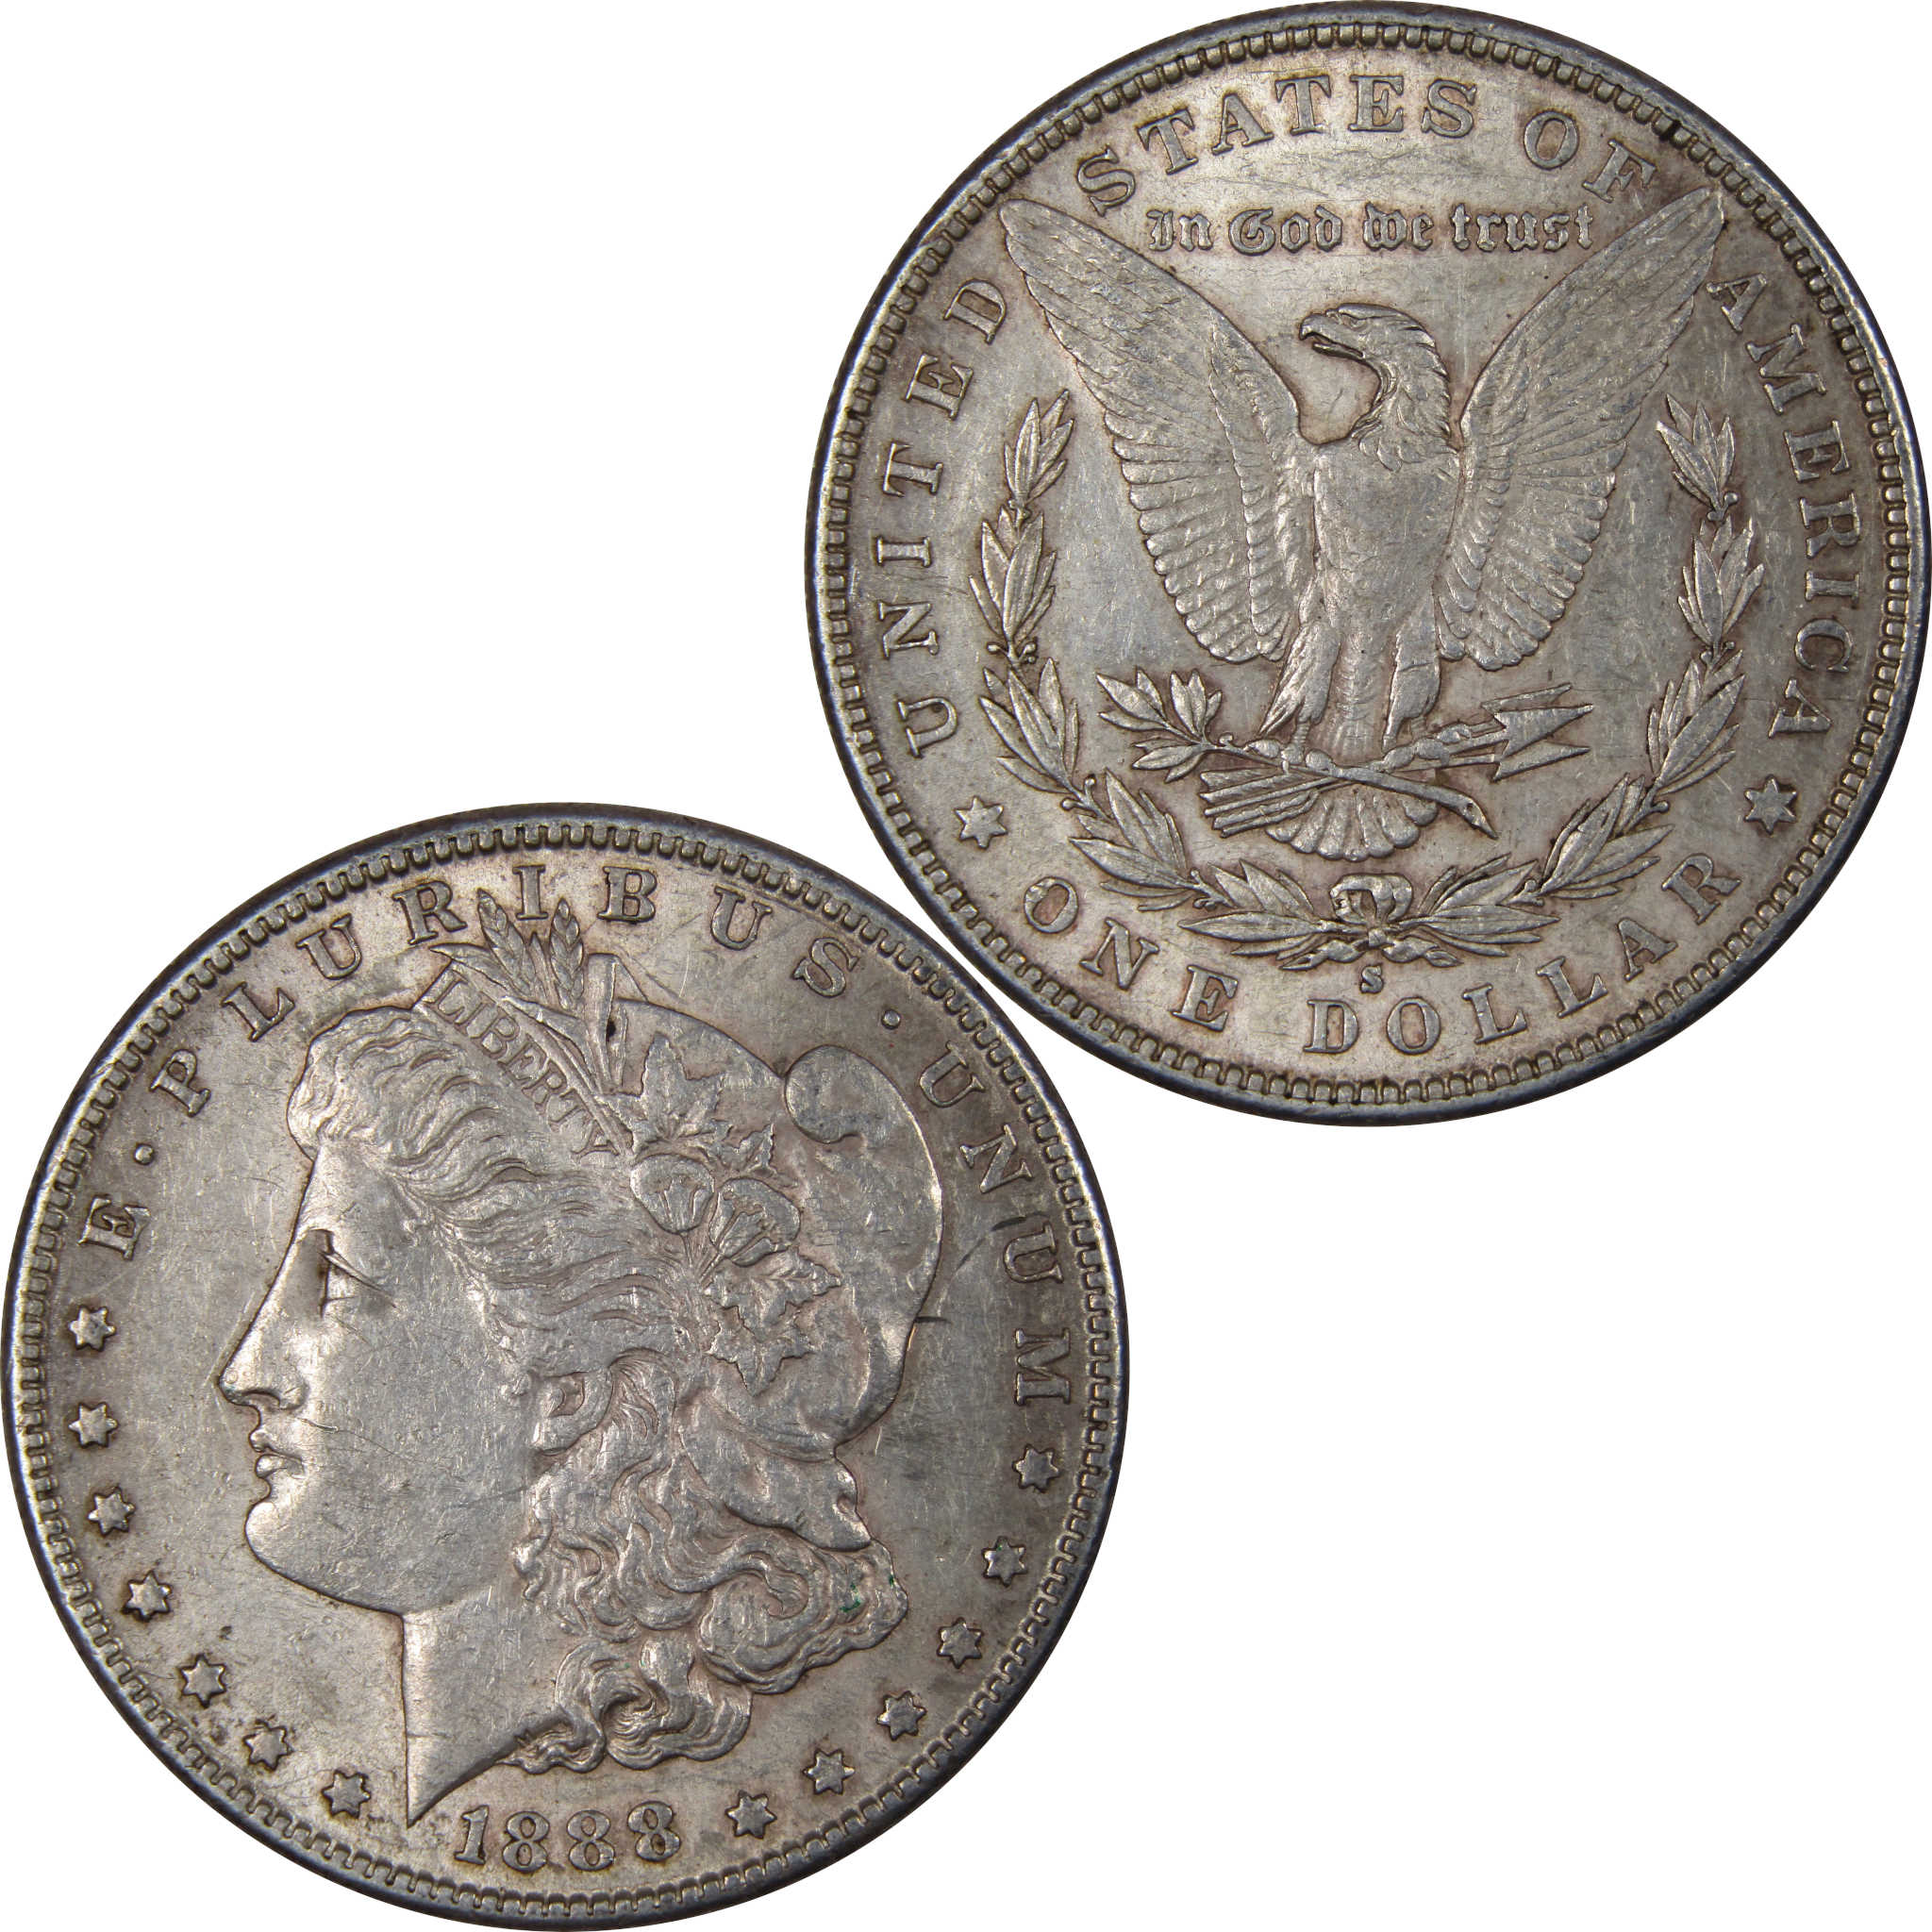 1888 S Morgan Dollar AU About Uncirculated 90% Silver SKU:IPC7981 - Morgan coin - Morgan silver dollar - Morgan silver dollar for sale - Profile Coins &amp; Collectibles